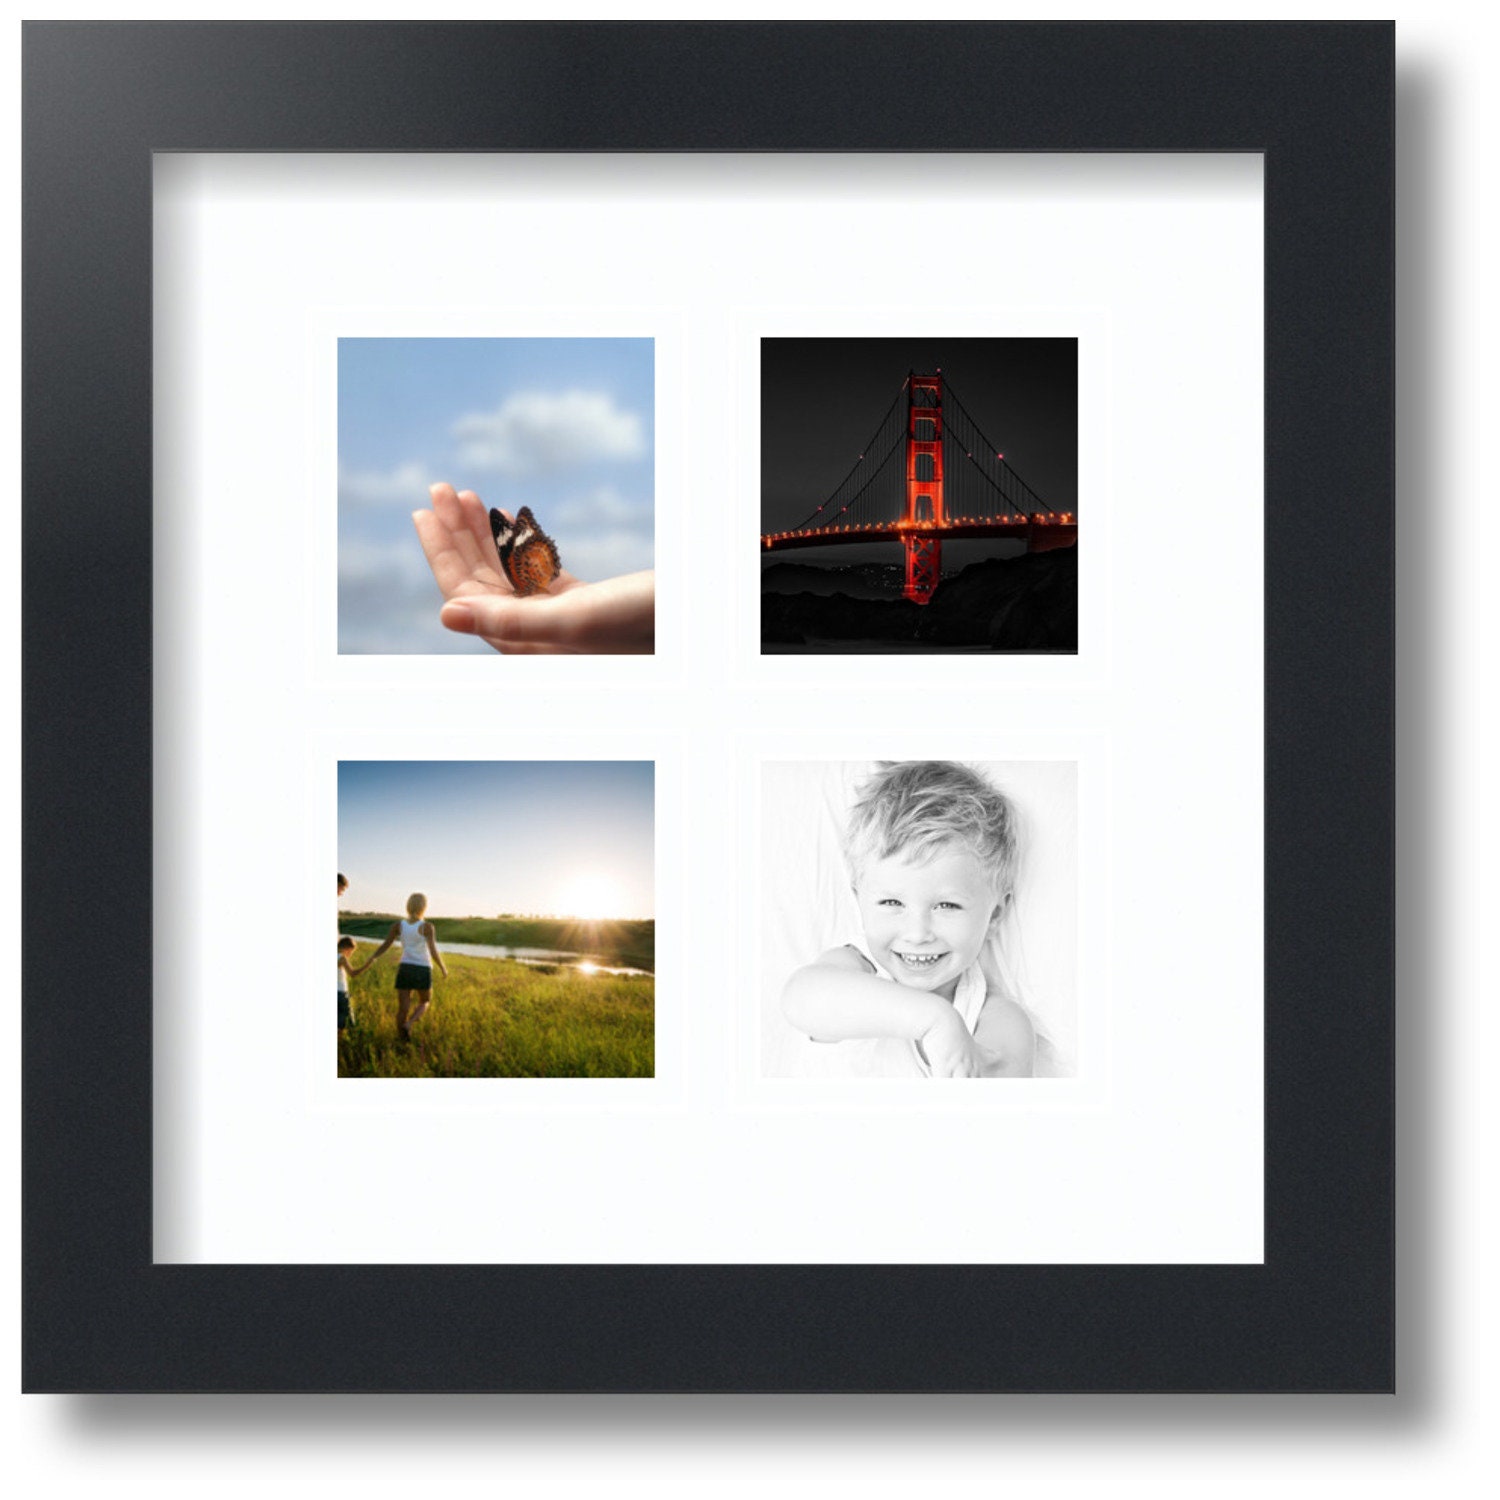 Gracie Oaks 6-Opening 19 X 14.5 Two-Toned Picture Frame Wall Collage,  Displays Two 4X4, Three 4X6 And One 5X7